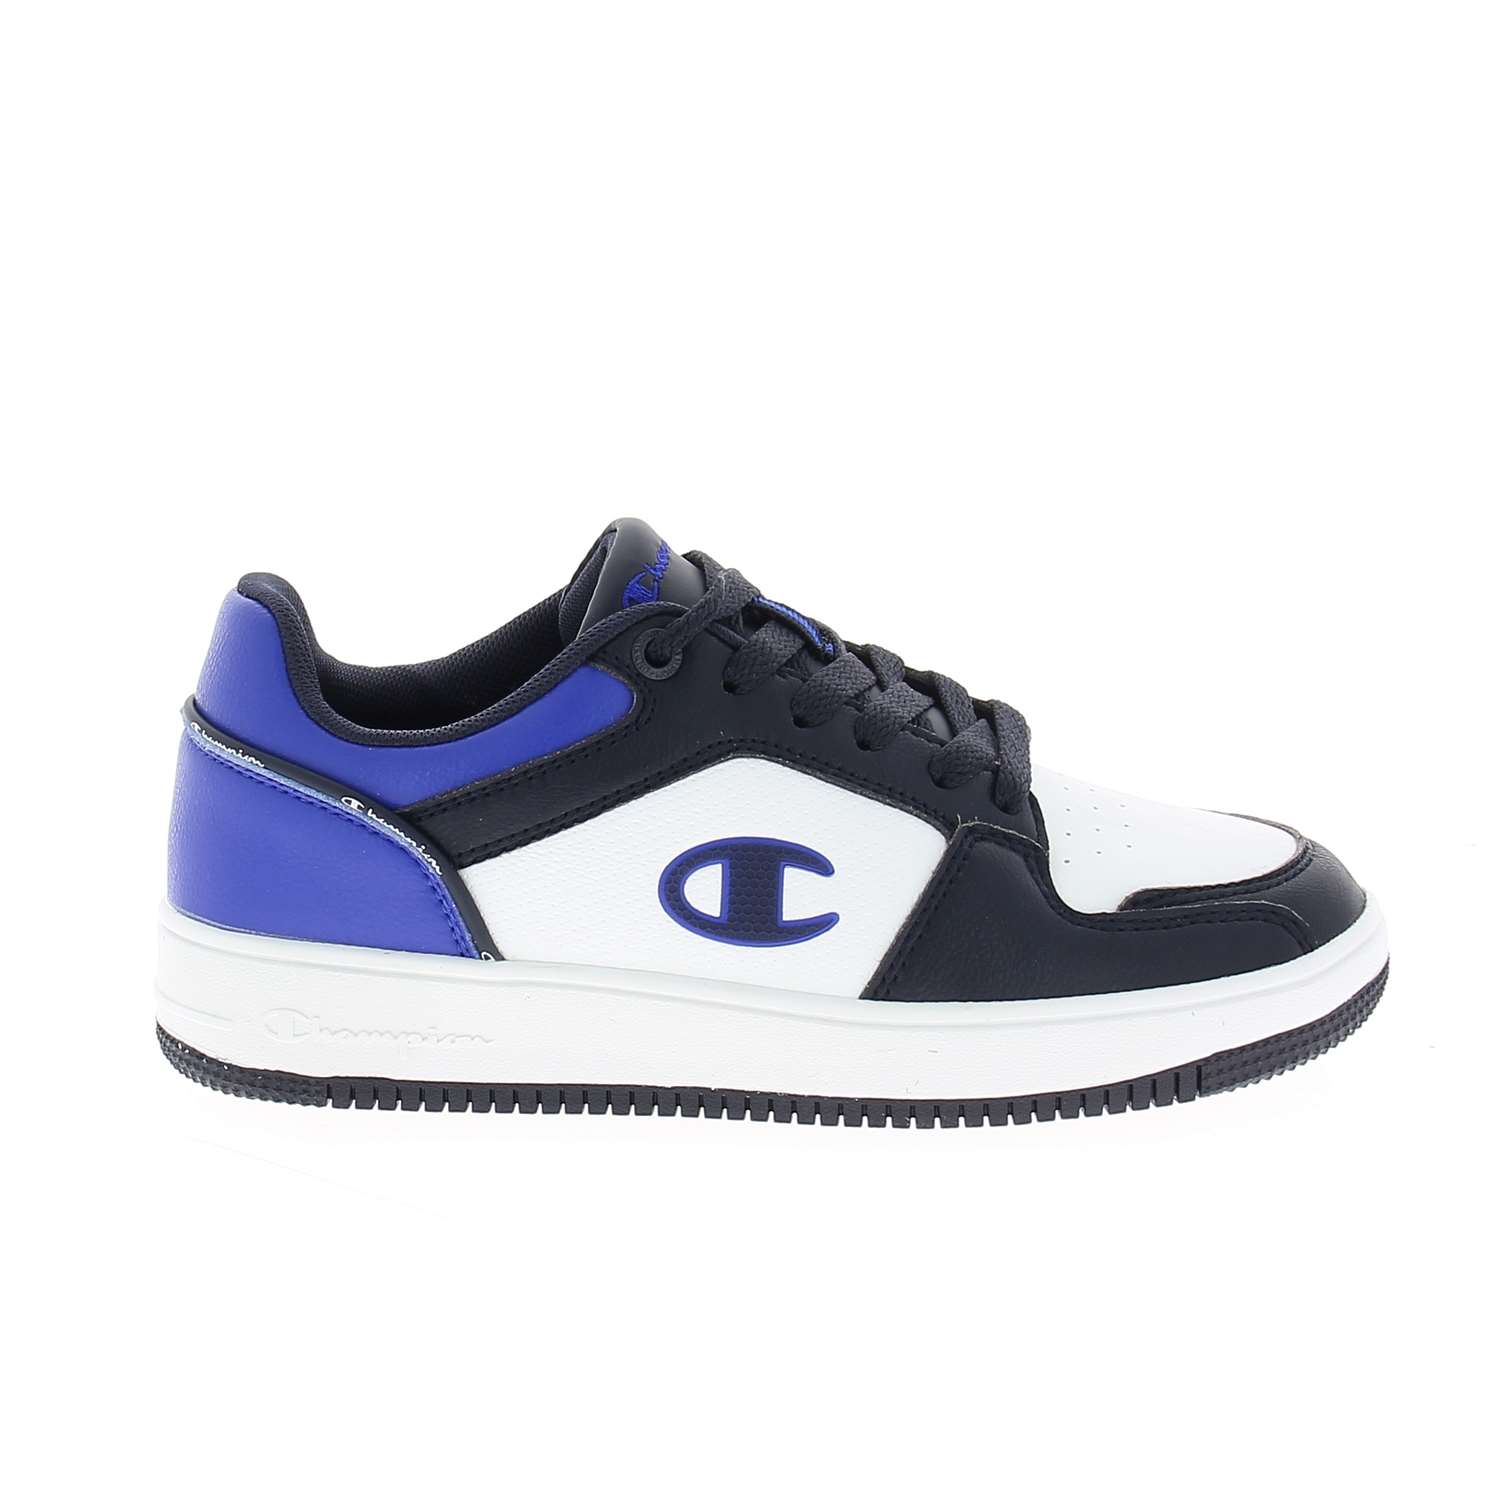 02 - REBOUND 2.0 LOW GS - CHAMPION - Baskets - Synthétique